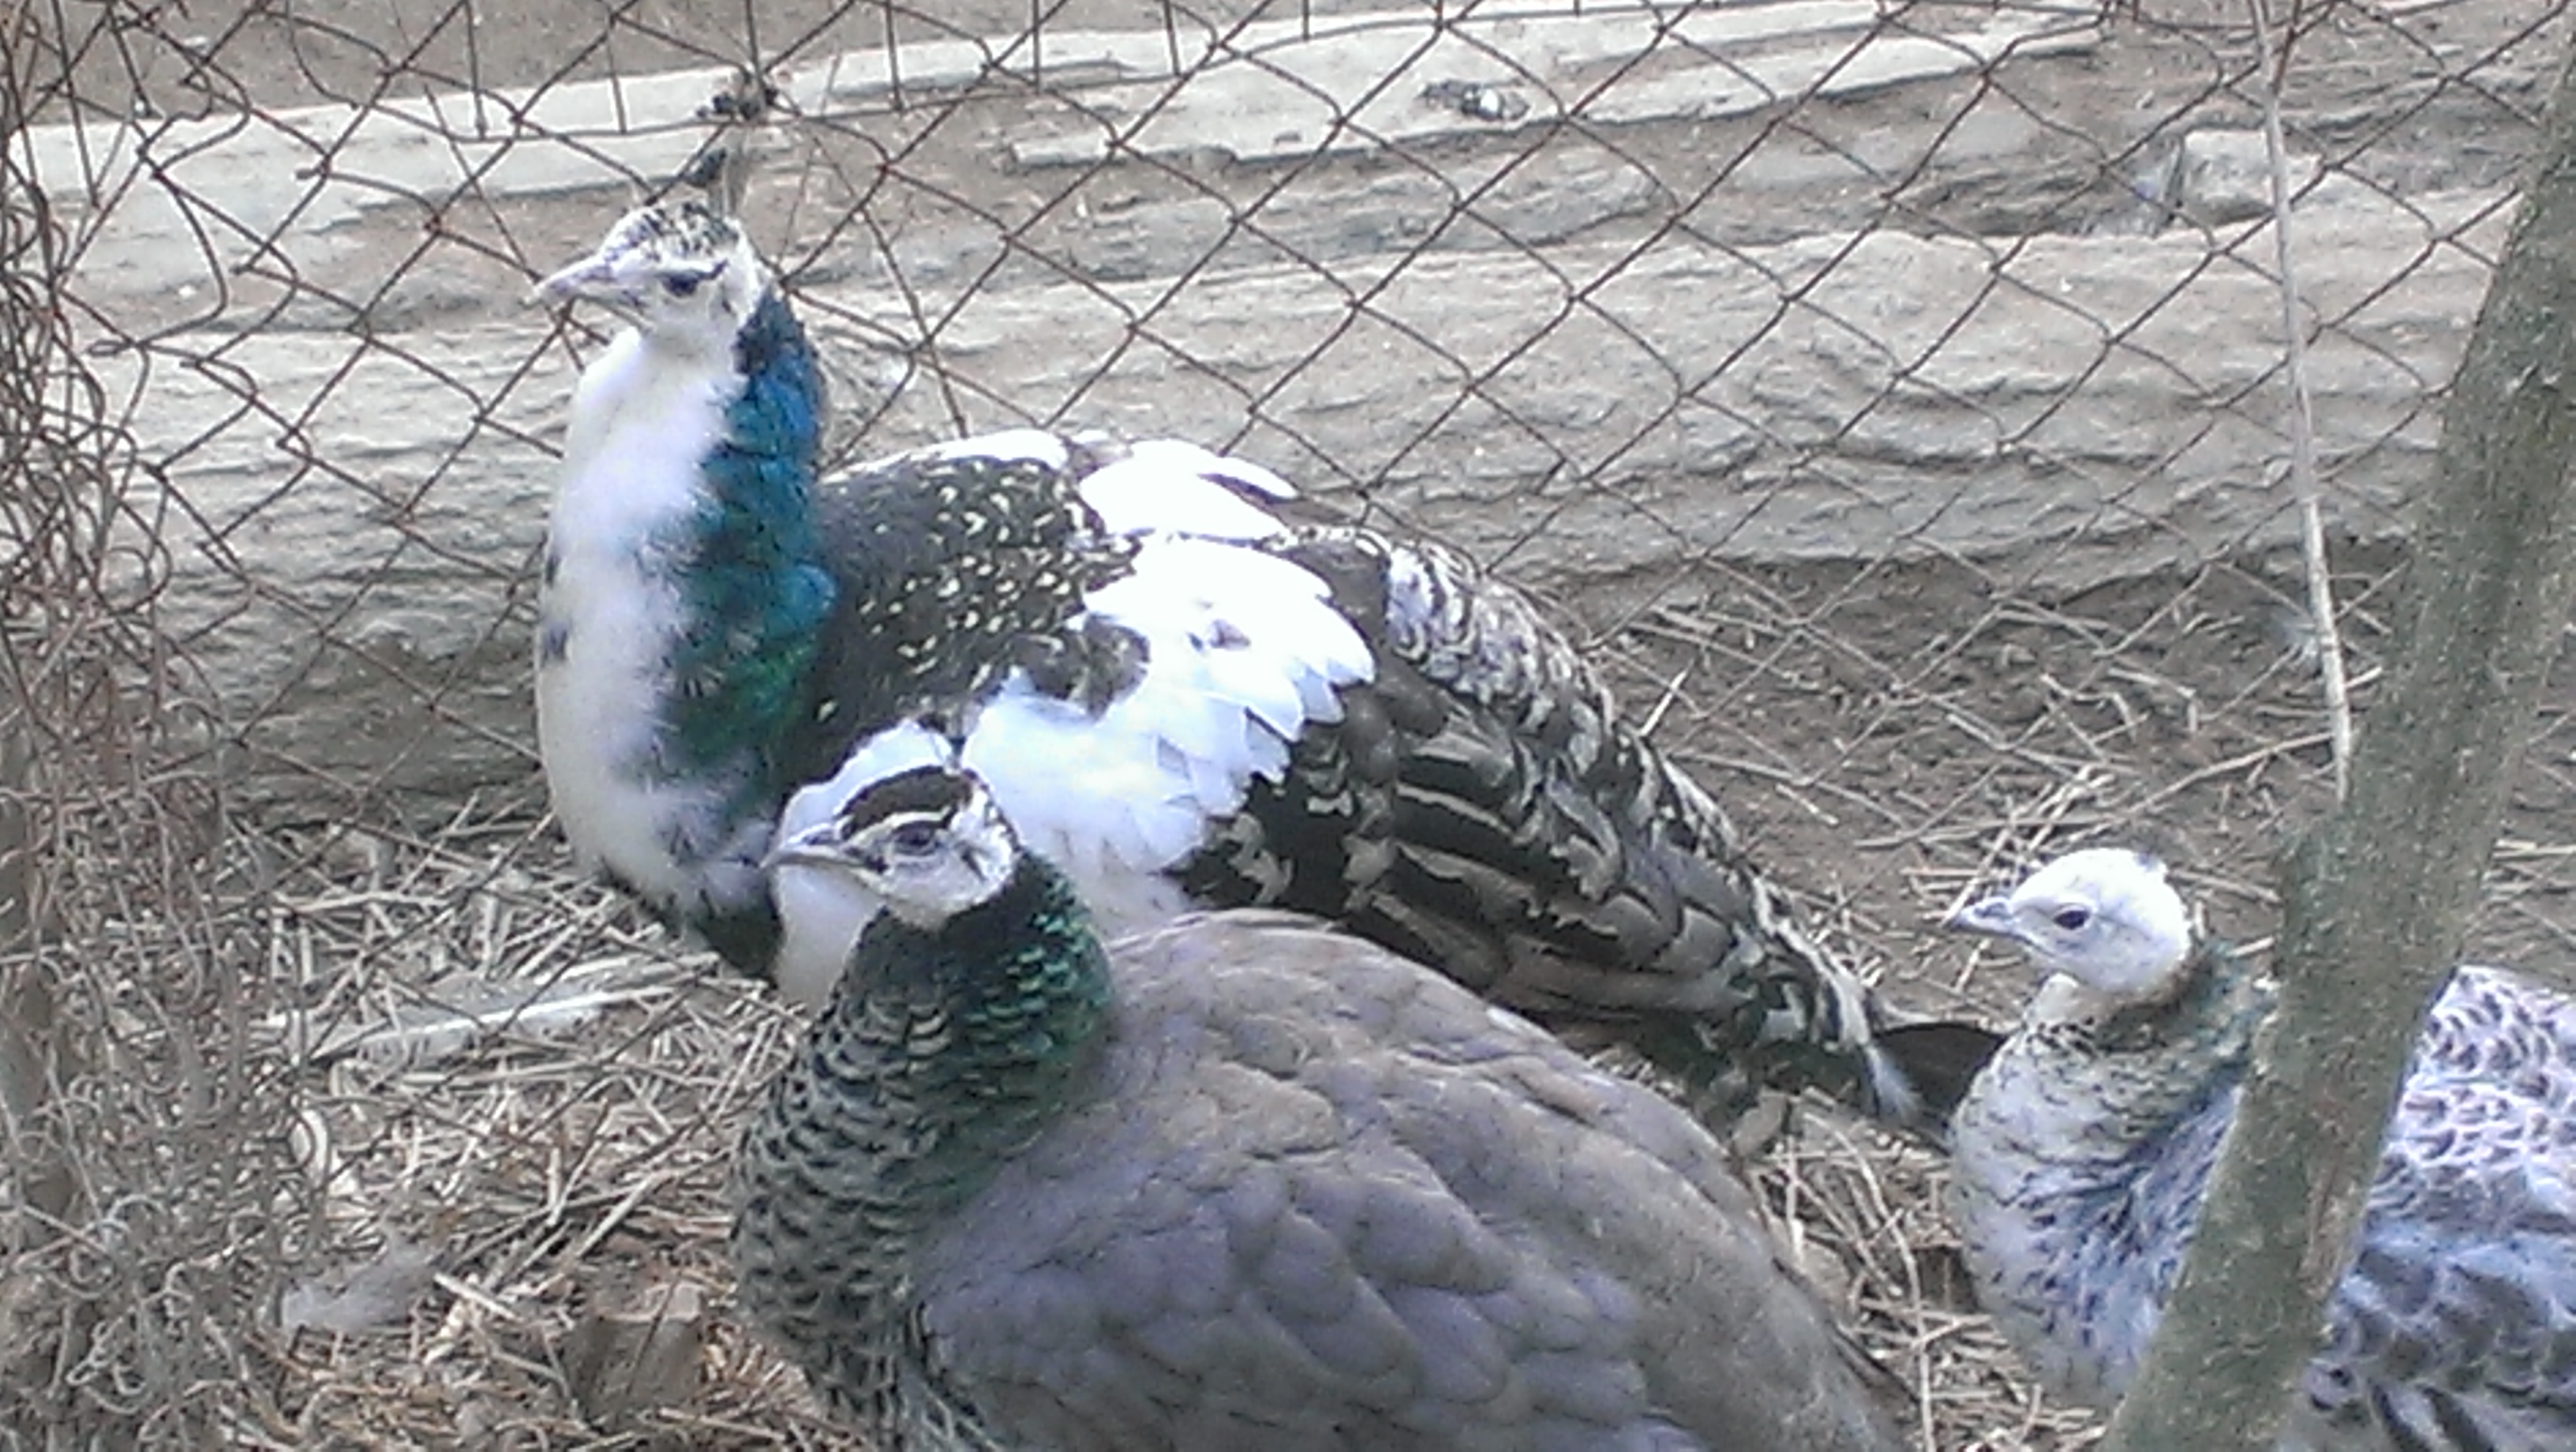 Bahamat , Ruby and Pearl. We hatched 1 1/2 years ago.